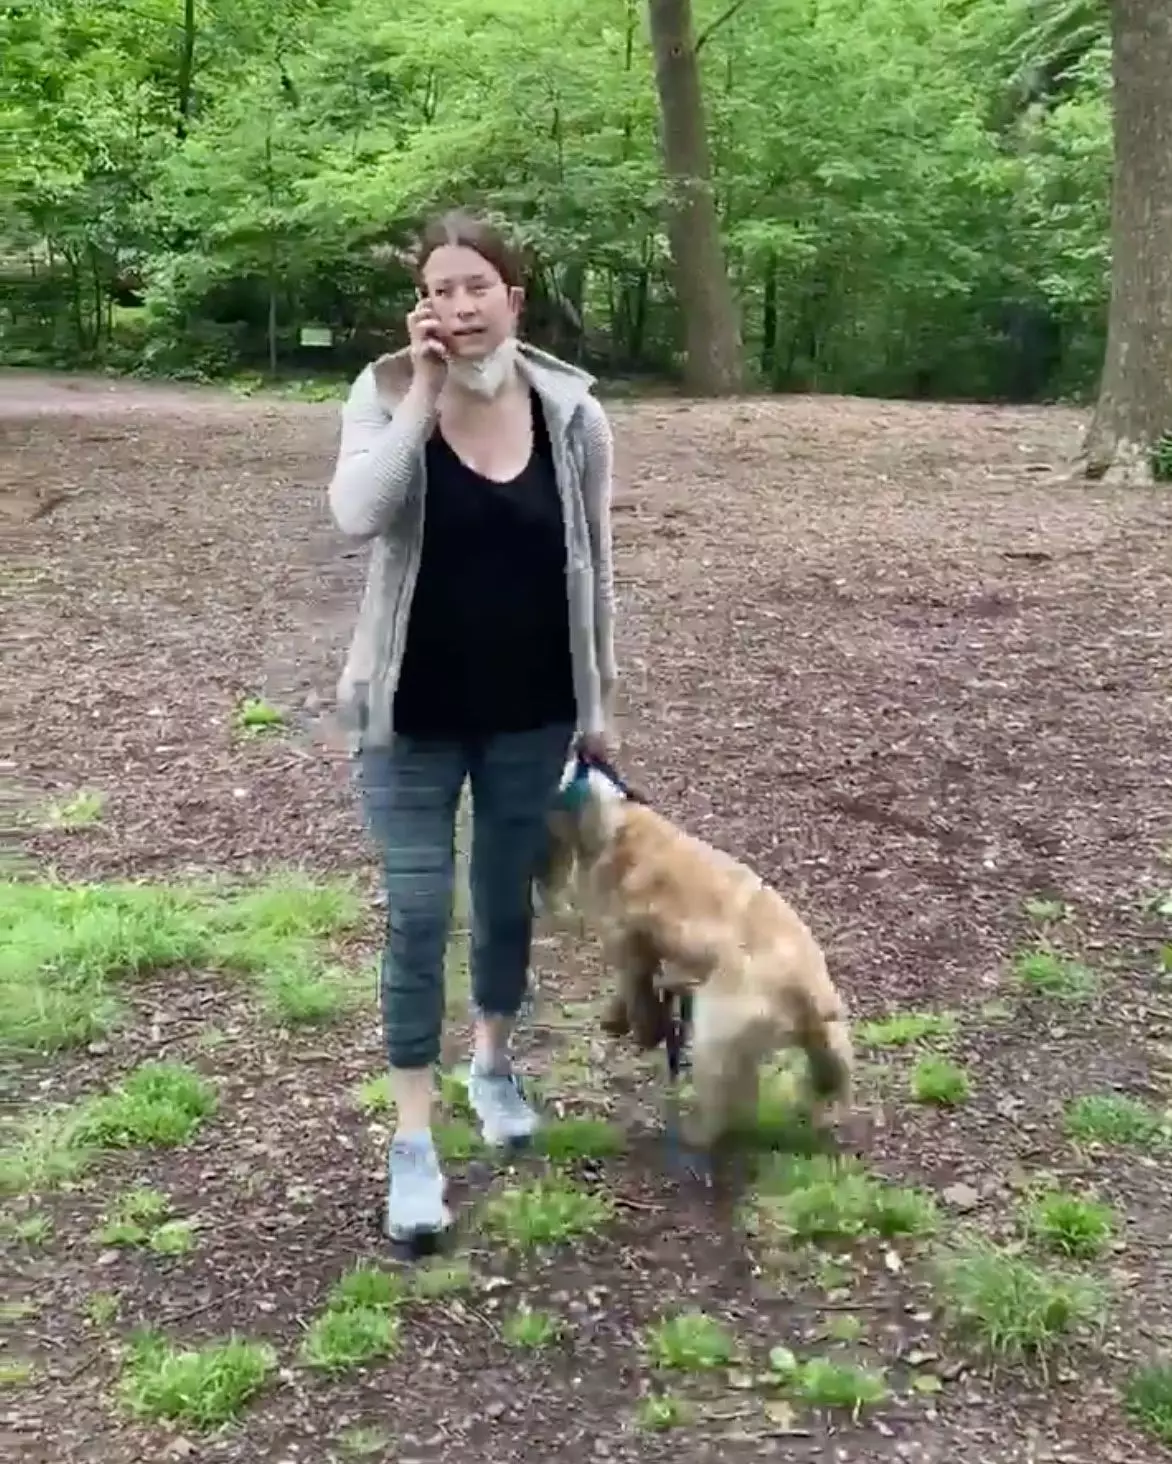 Amy Cooper called the police on a black man after he told her to put her dog on a leash.